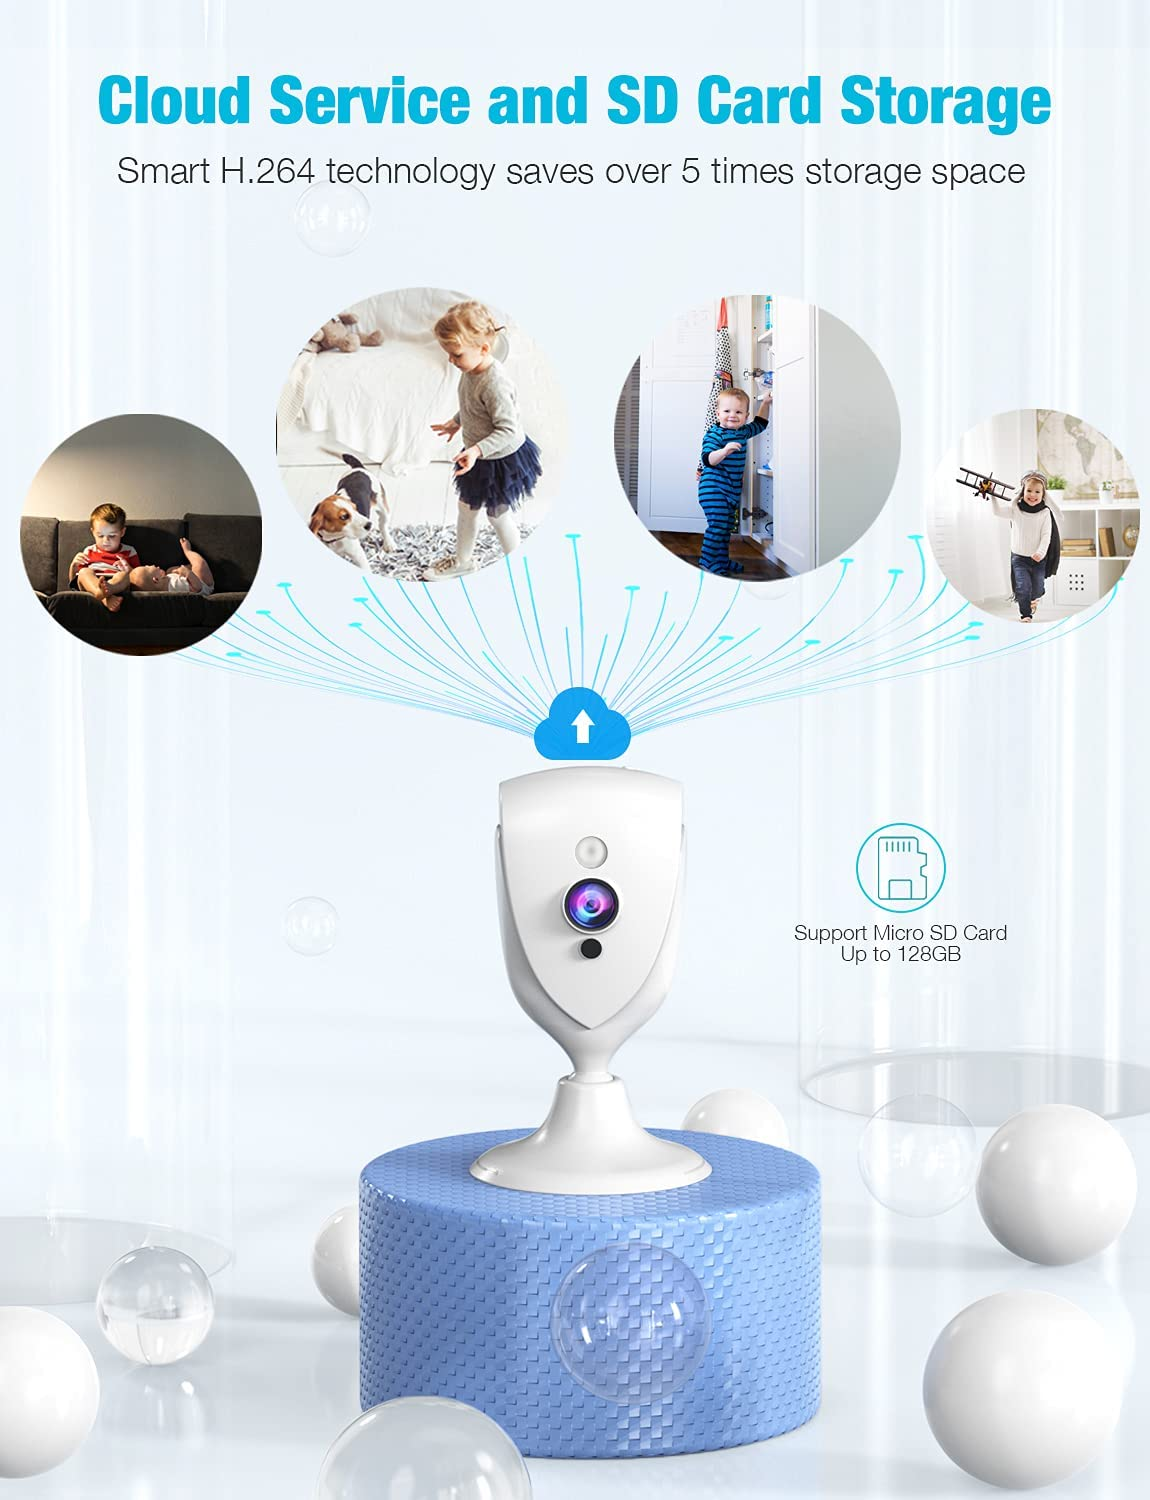 Pet Camera,1080P Mini Baby Monitor with Camera and Audio,Night Vision, 2-Way Audio,Motion Alarm for Home Security Camera,Watch Live Streaming Video Anywhere,Cloud Storage,Work with 2.4G Wifi